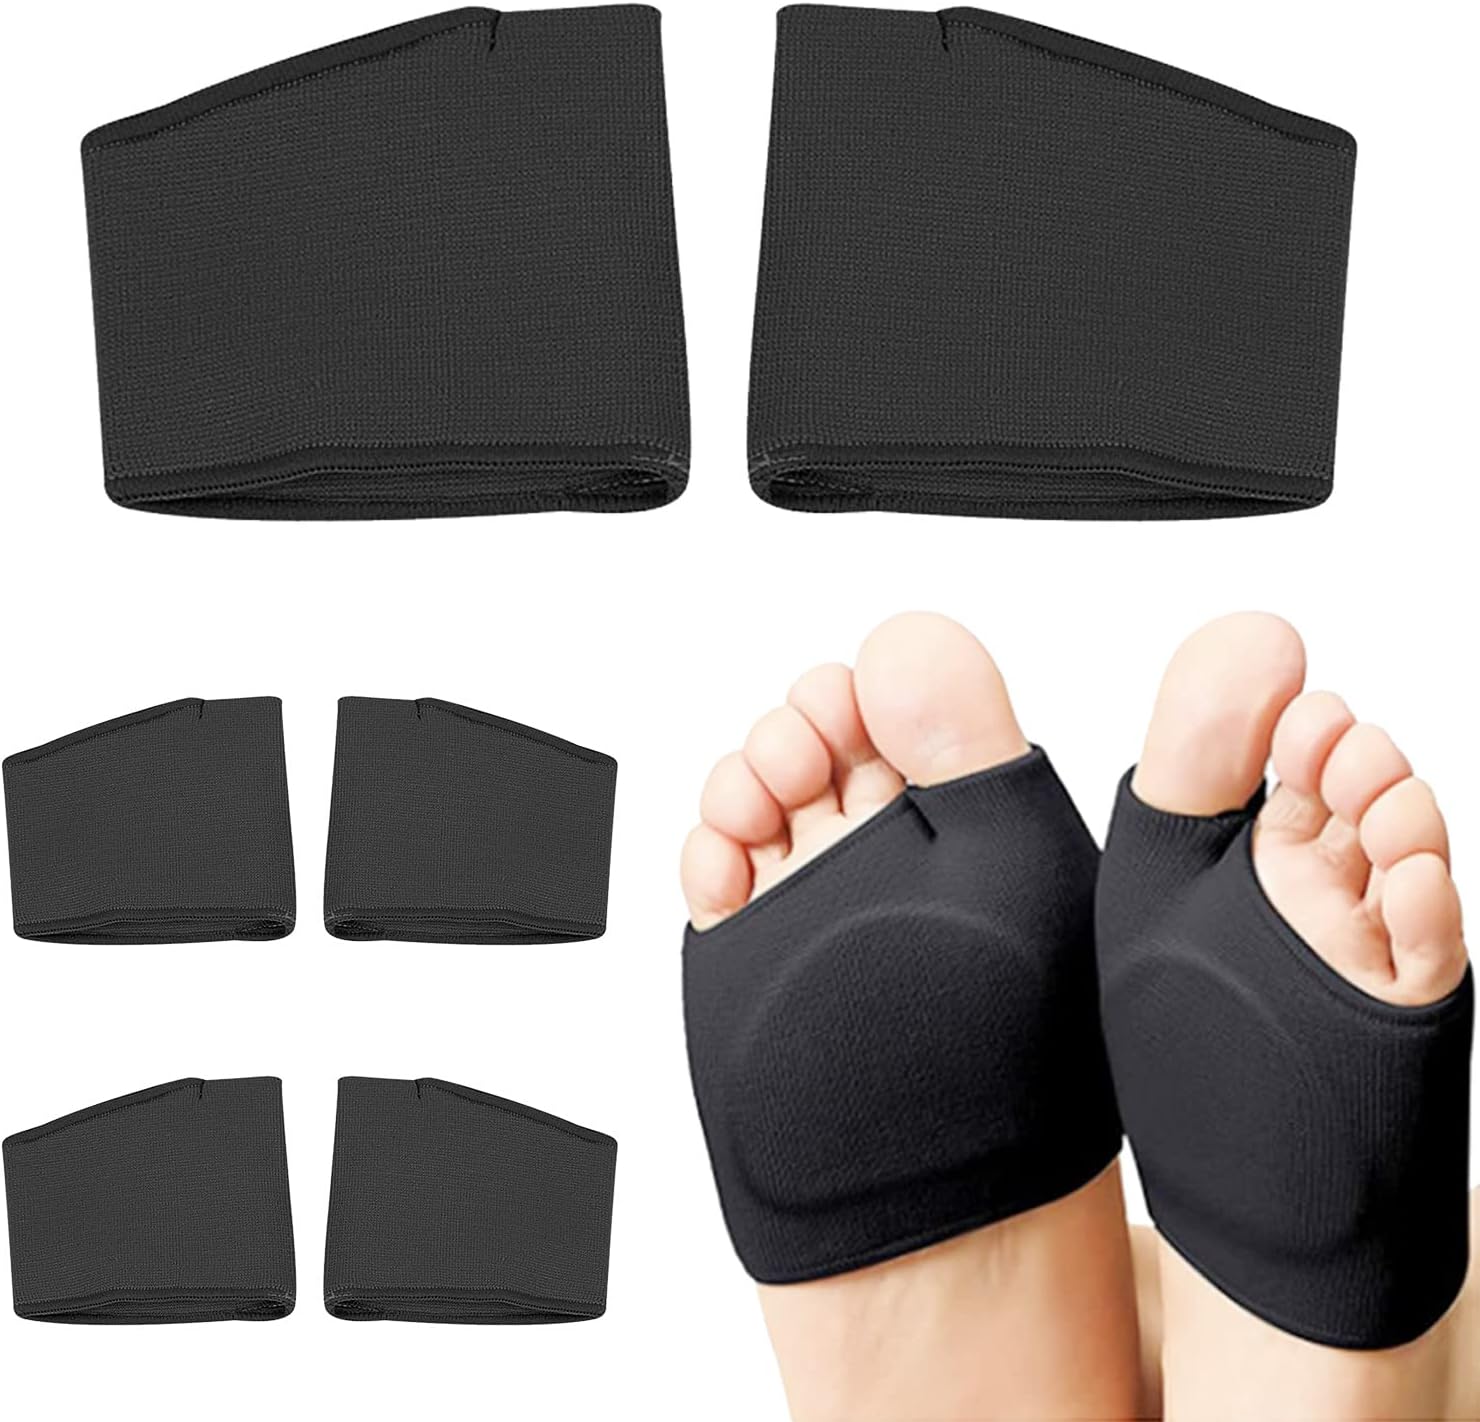 3 Pairs of Metatarsal Pads for Women and Men, Ball of [...]